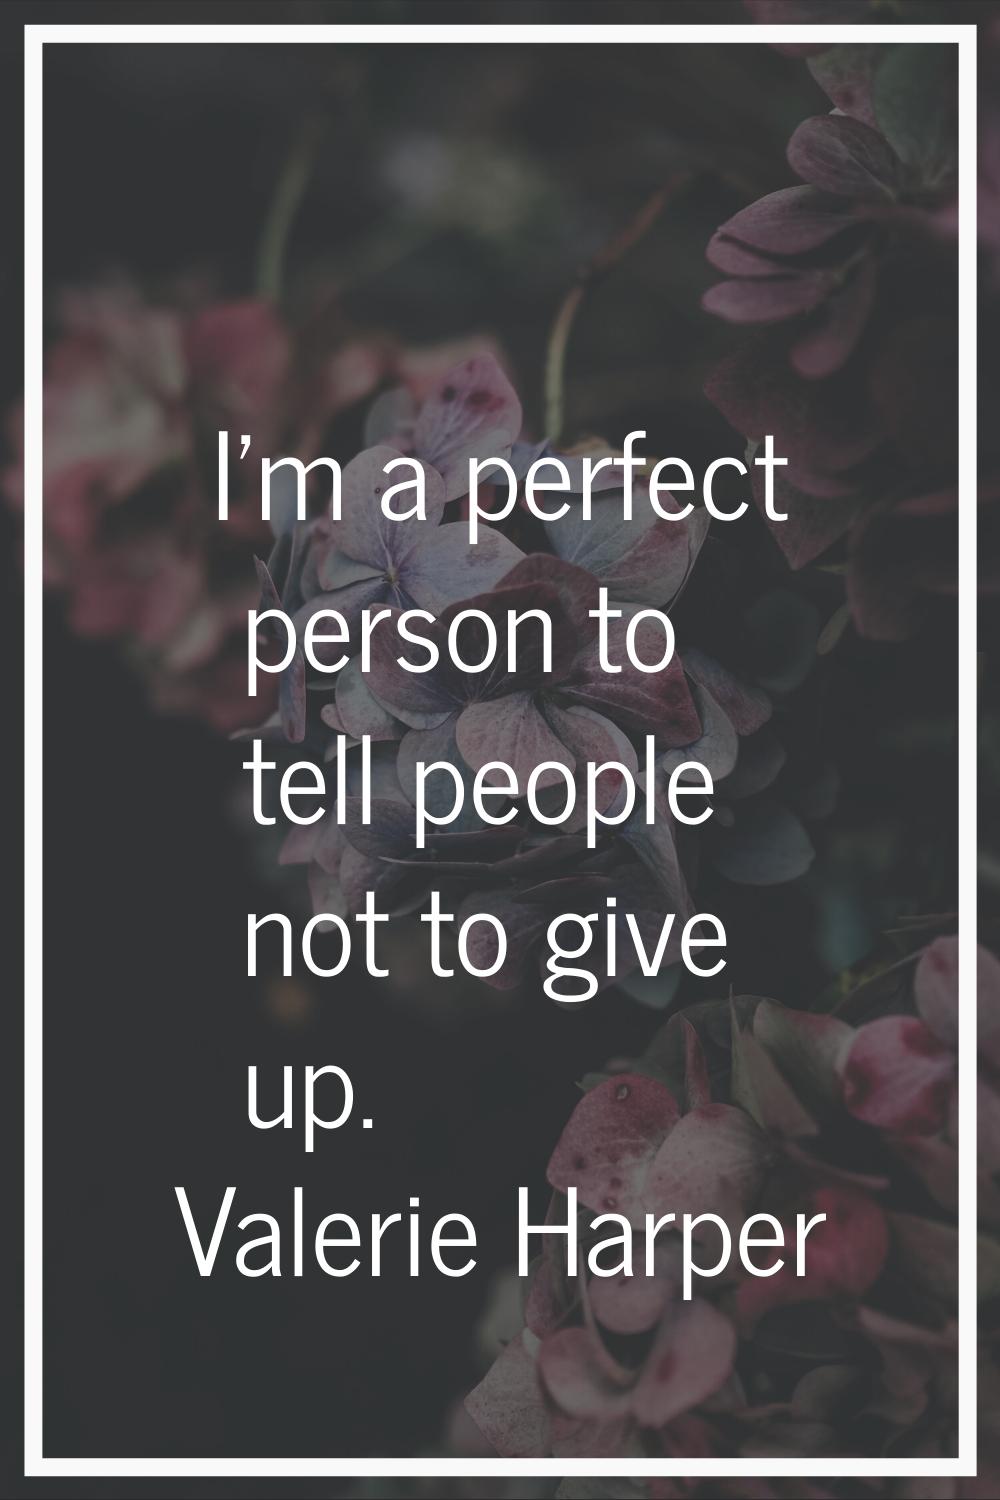 I'm a perfect person to tell people not to give up.